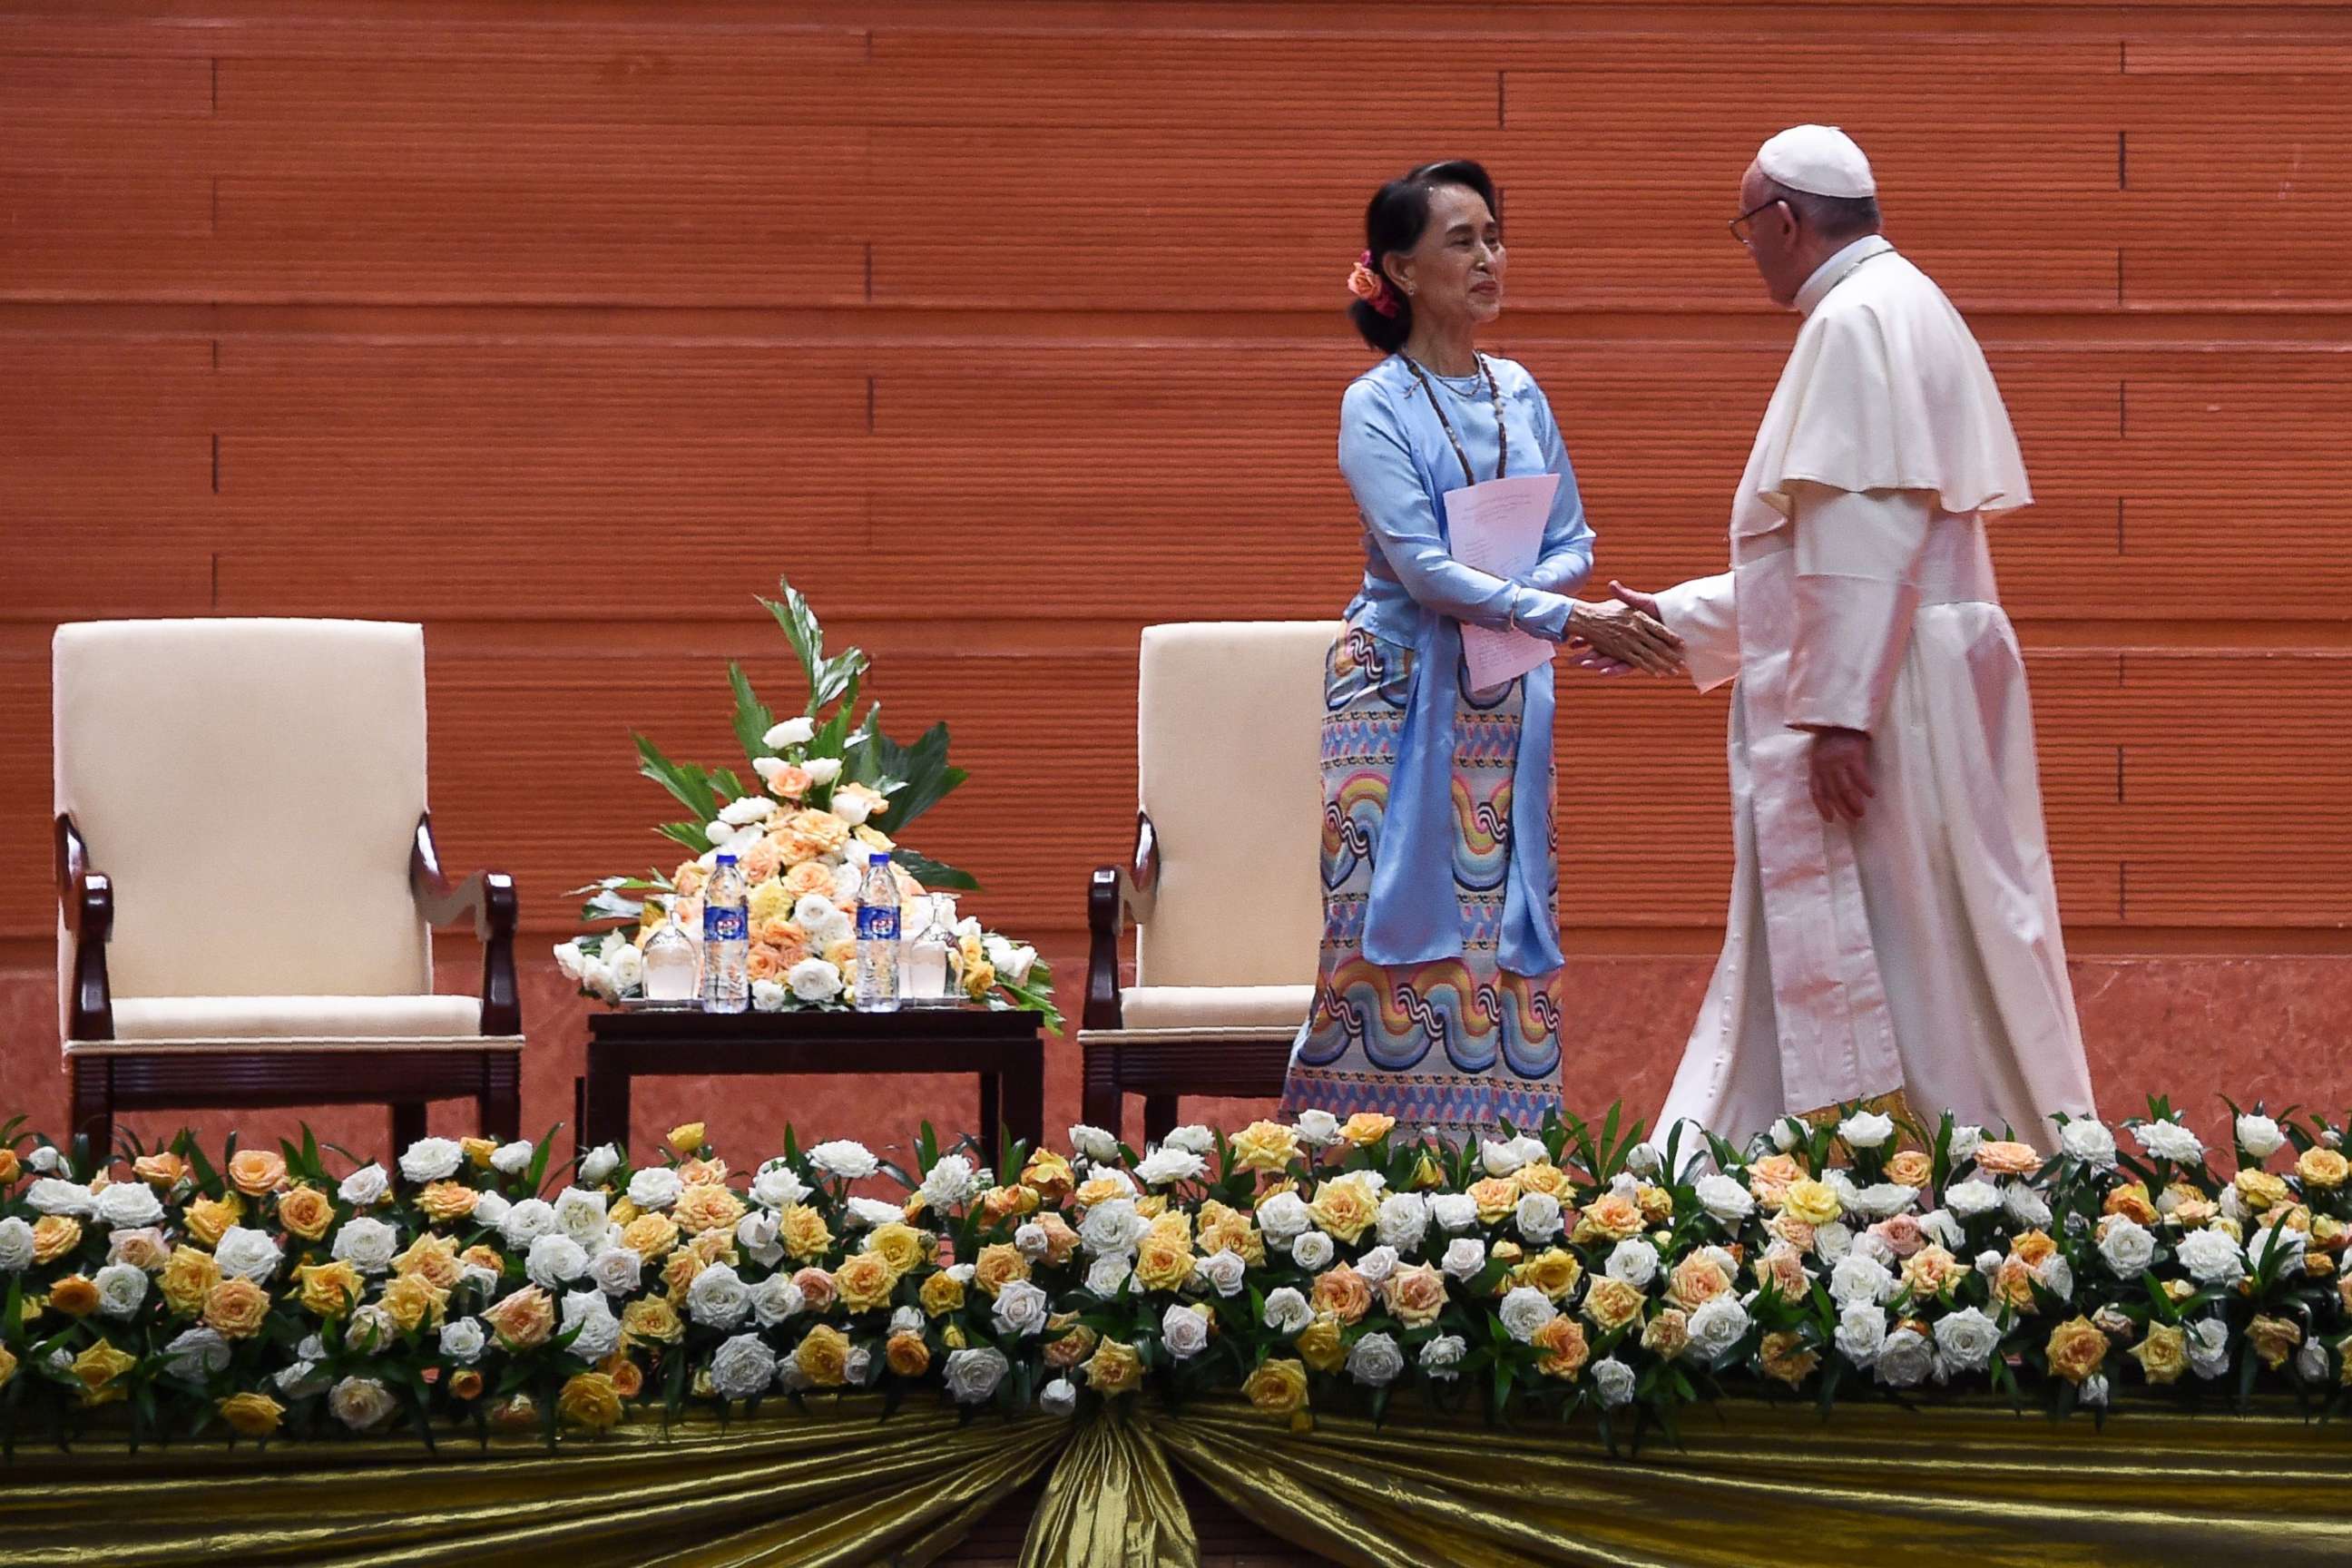 PHOTO: Pope Francis shakes hands with Myanmar's civilian leader Aung San Suu Kyi during an event in Naypyidaw, Nov. 28, 2017.
